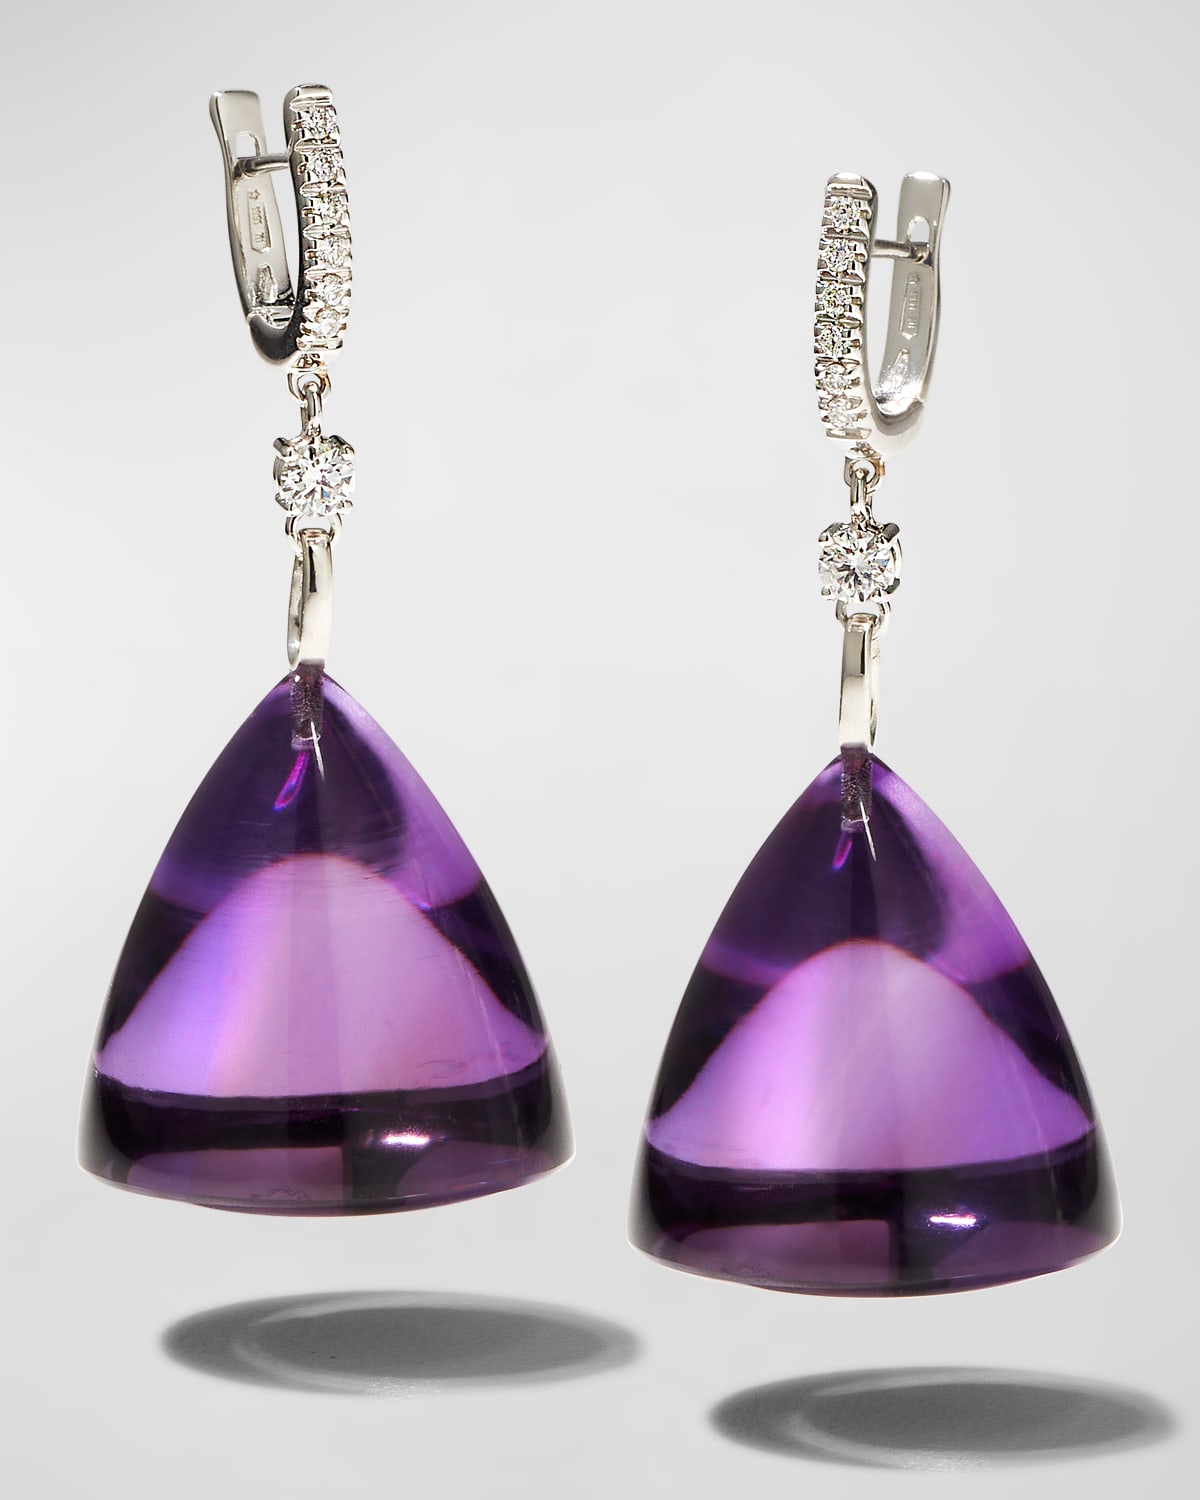 Sanalitro 18k White Gold Renaissance Earrings With Amethyst And Diamonds